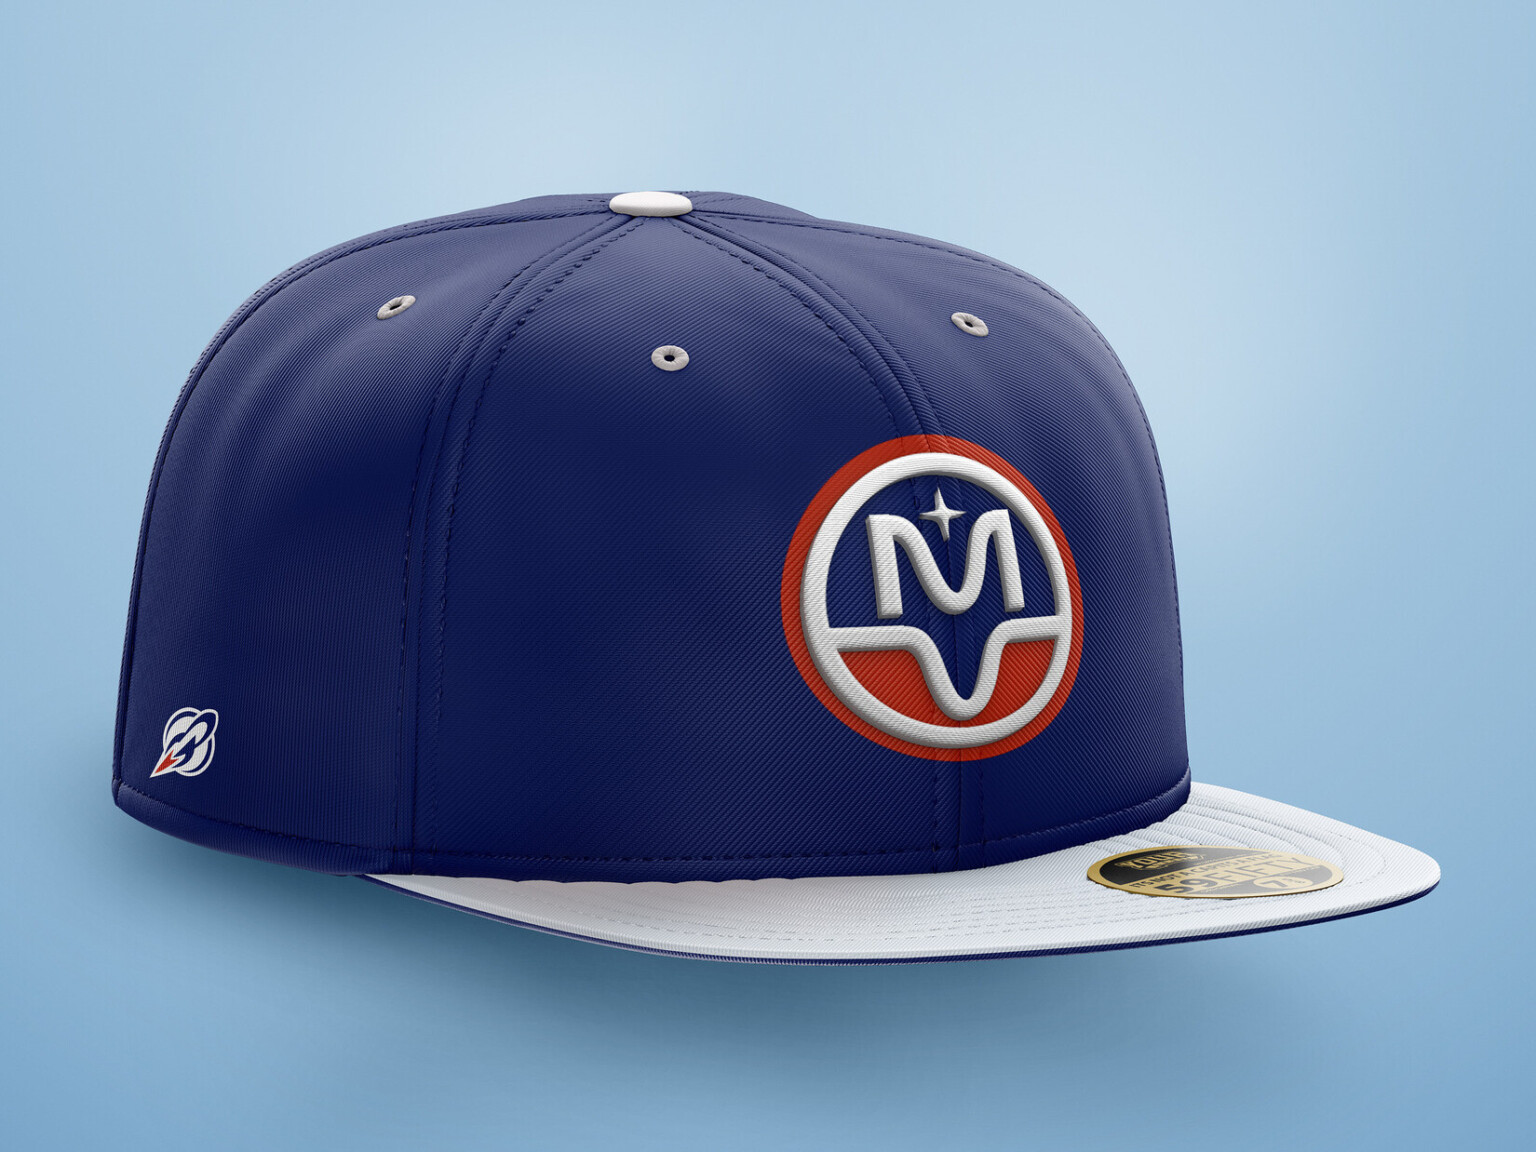 Blue baseball cap with blue, white, and red MV logo for Moon Valley High School